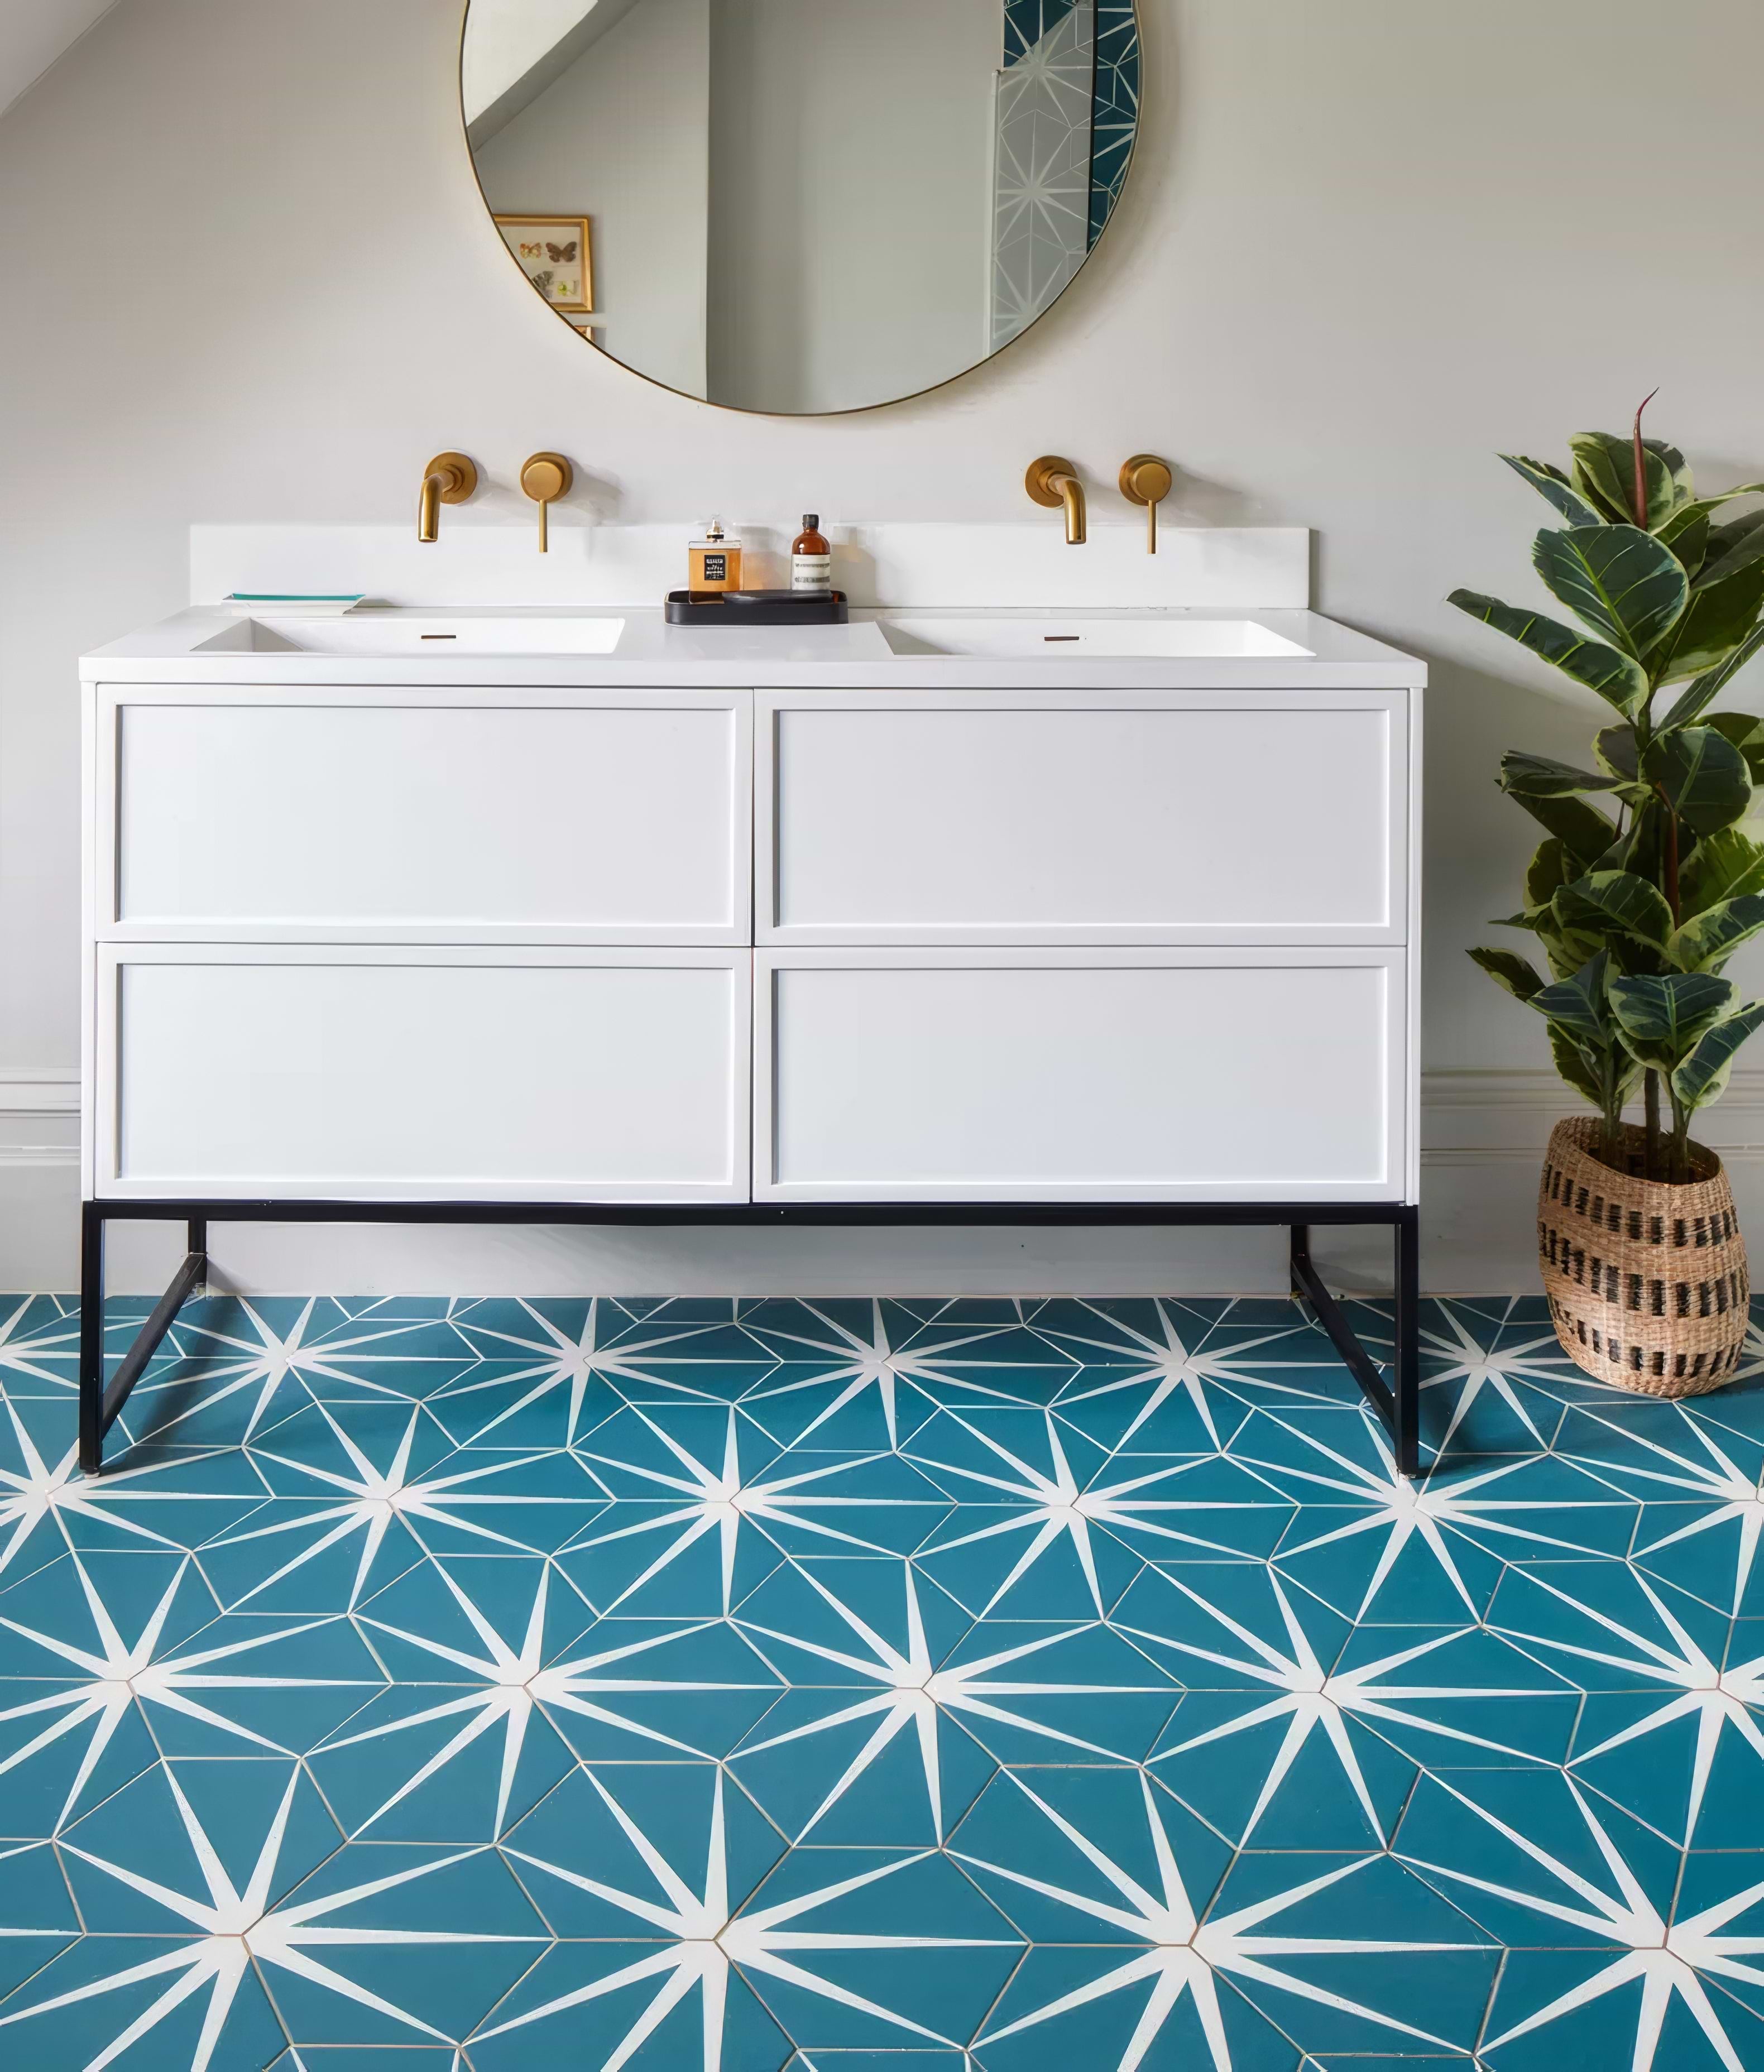 Lily Pad Porcelain Peacock - Hyperion Tiles